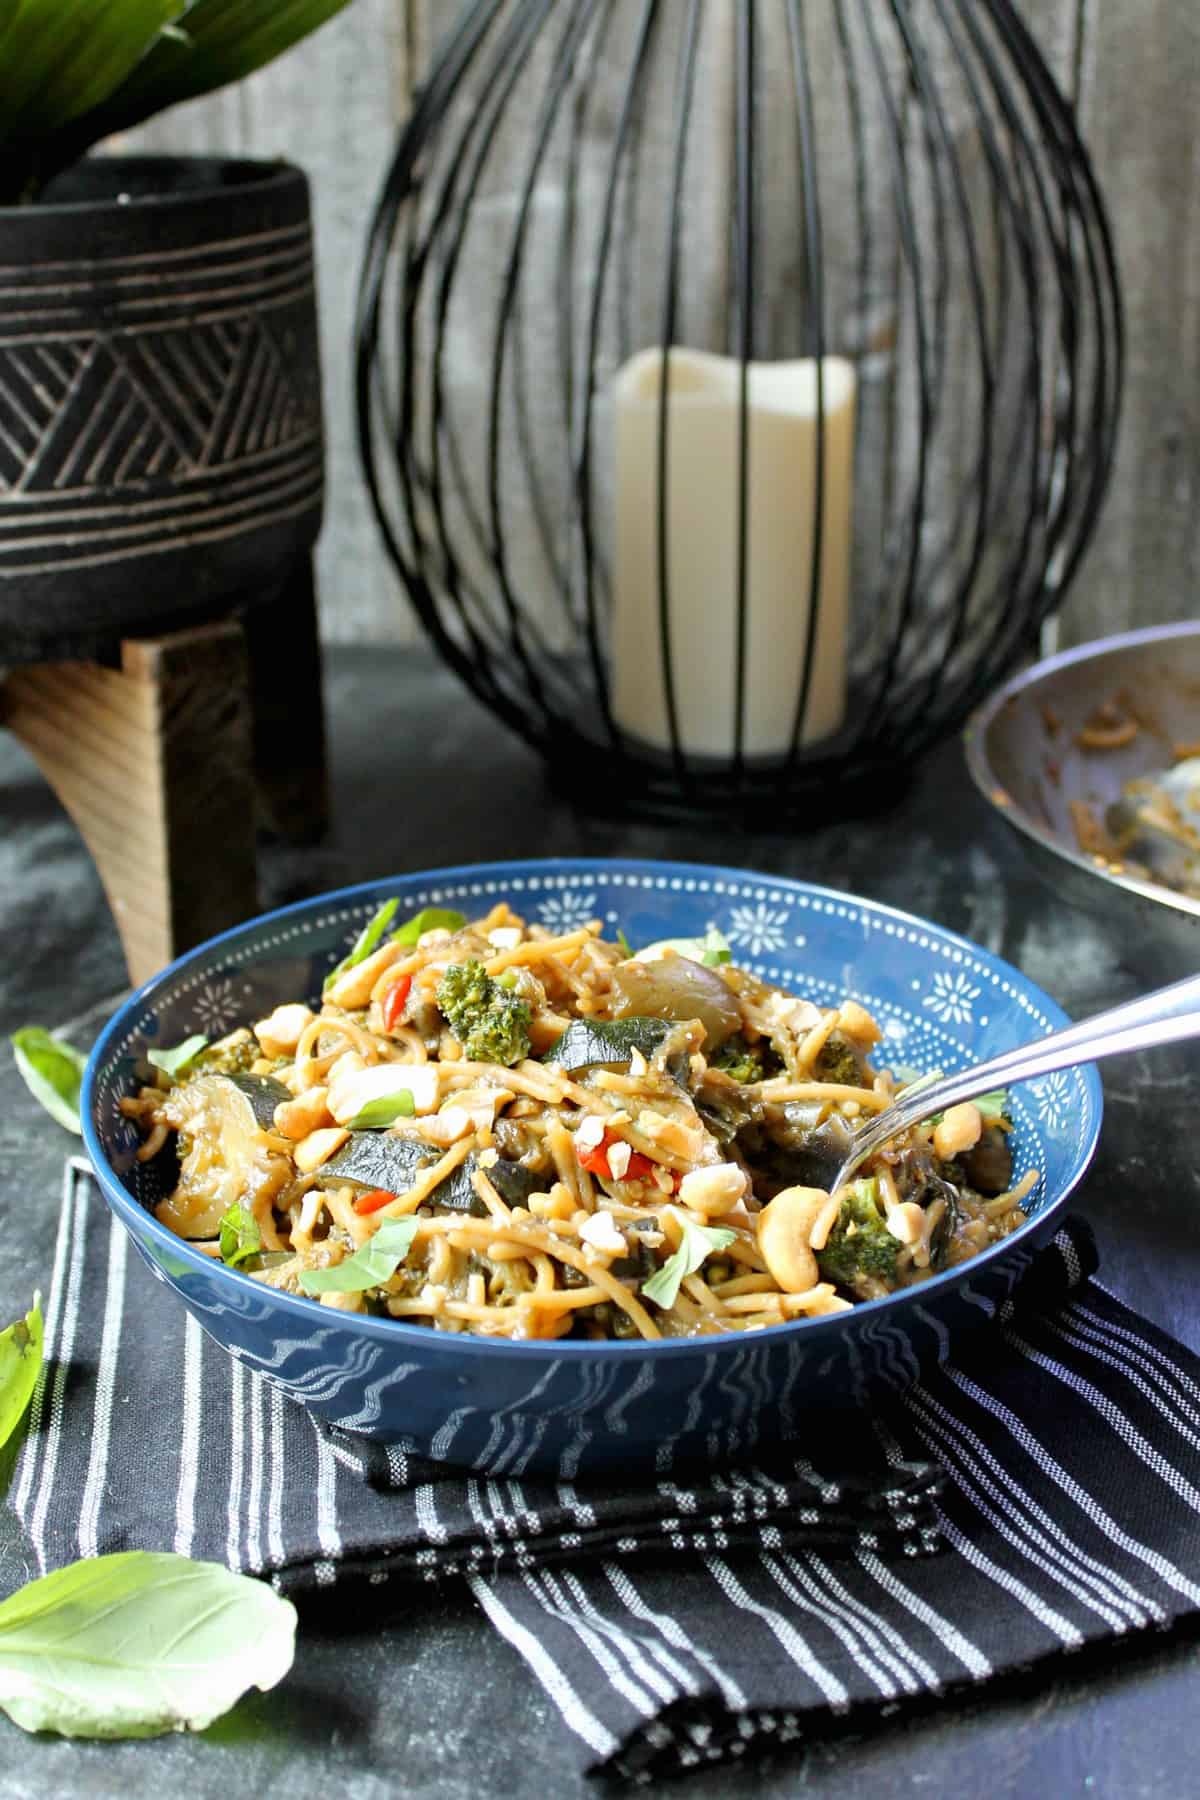 Spicy Thai Eggplant Stir Fry! Spice up your midweek meals with this simple dish made even quicker by using a Trader Joe's freezer item! Turn one little package into a hearty meal by adding just a few extra ingredients. 